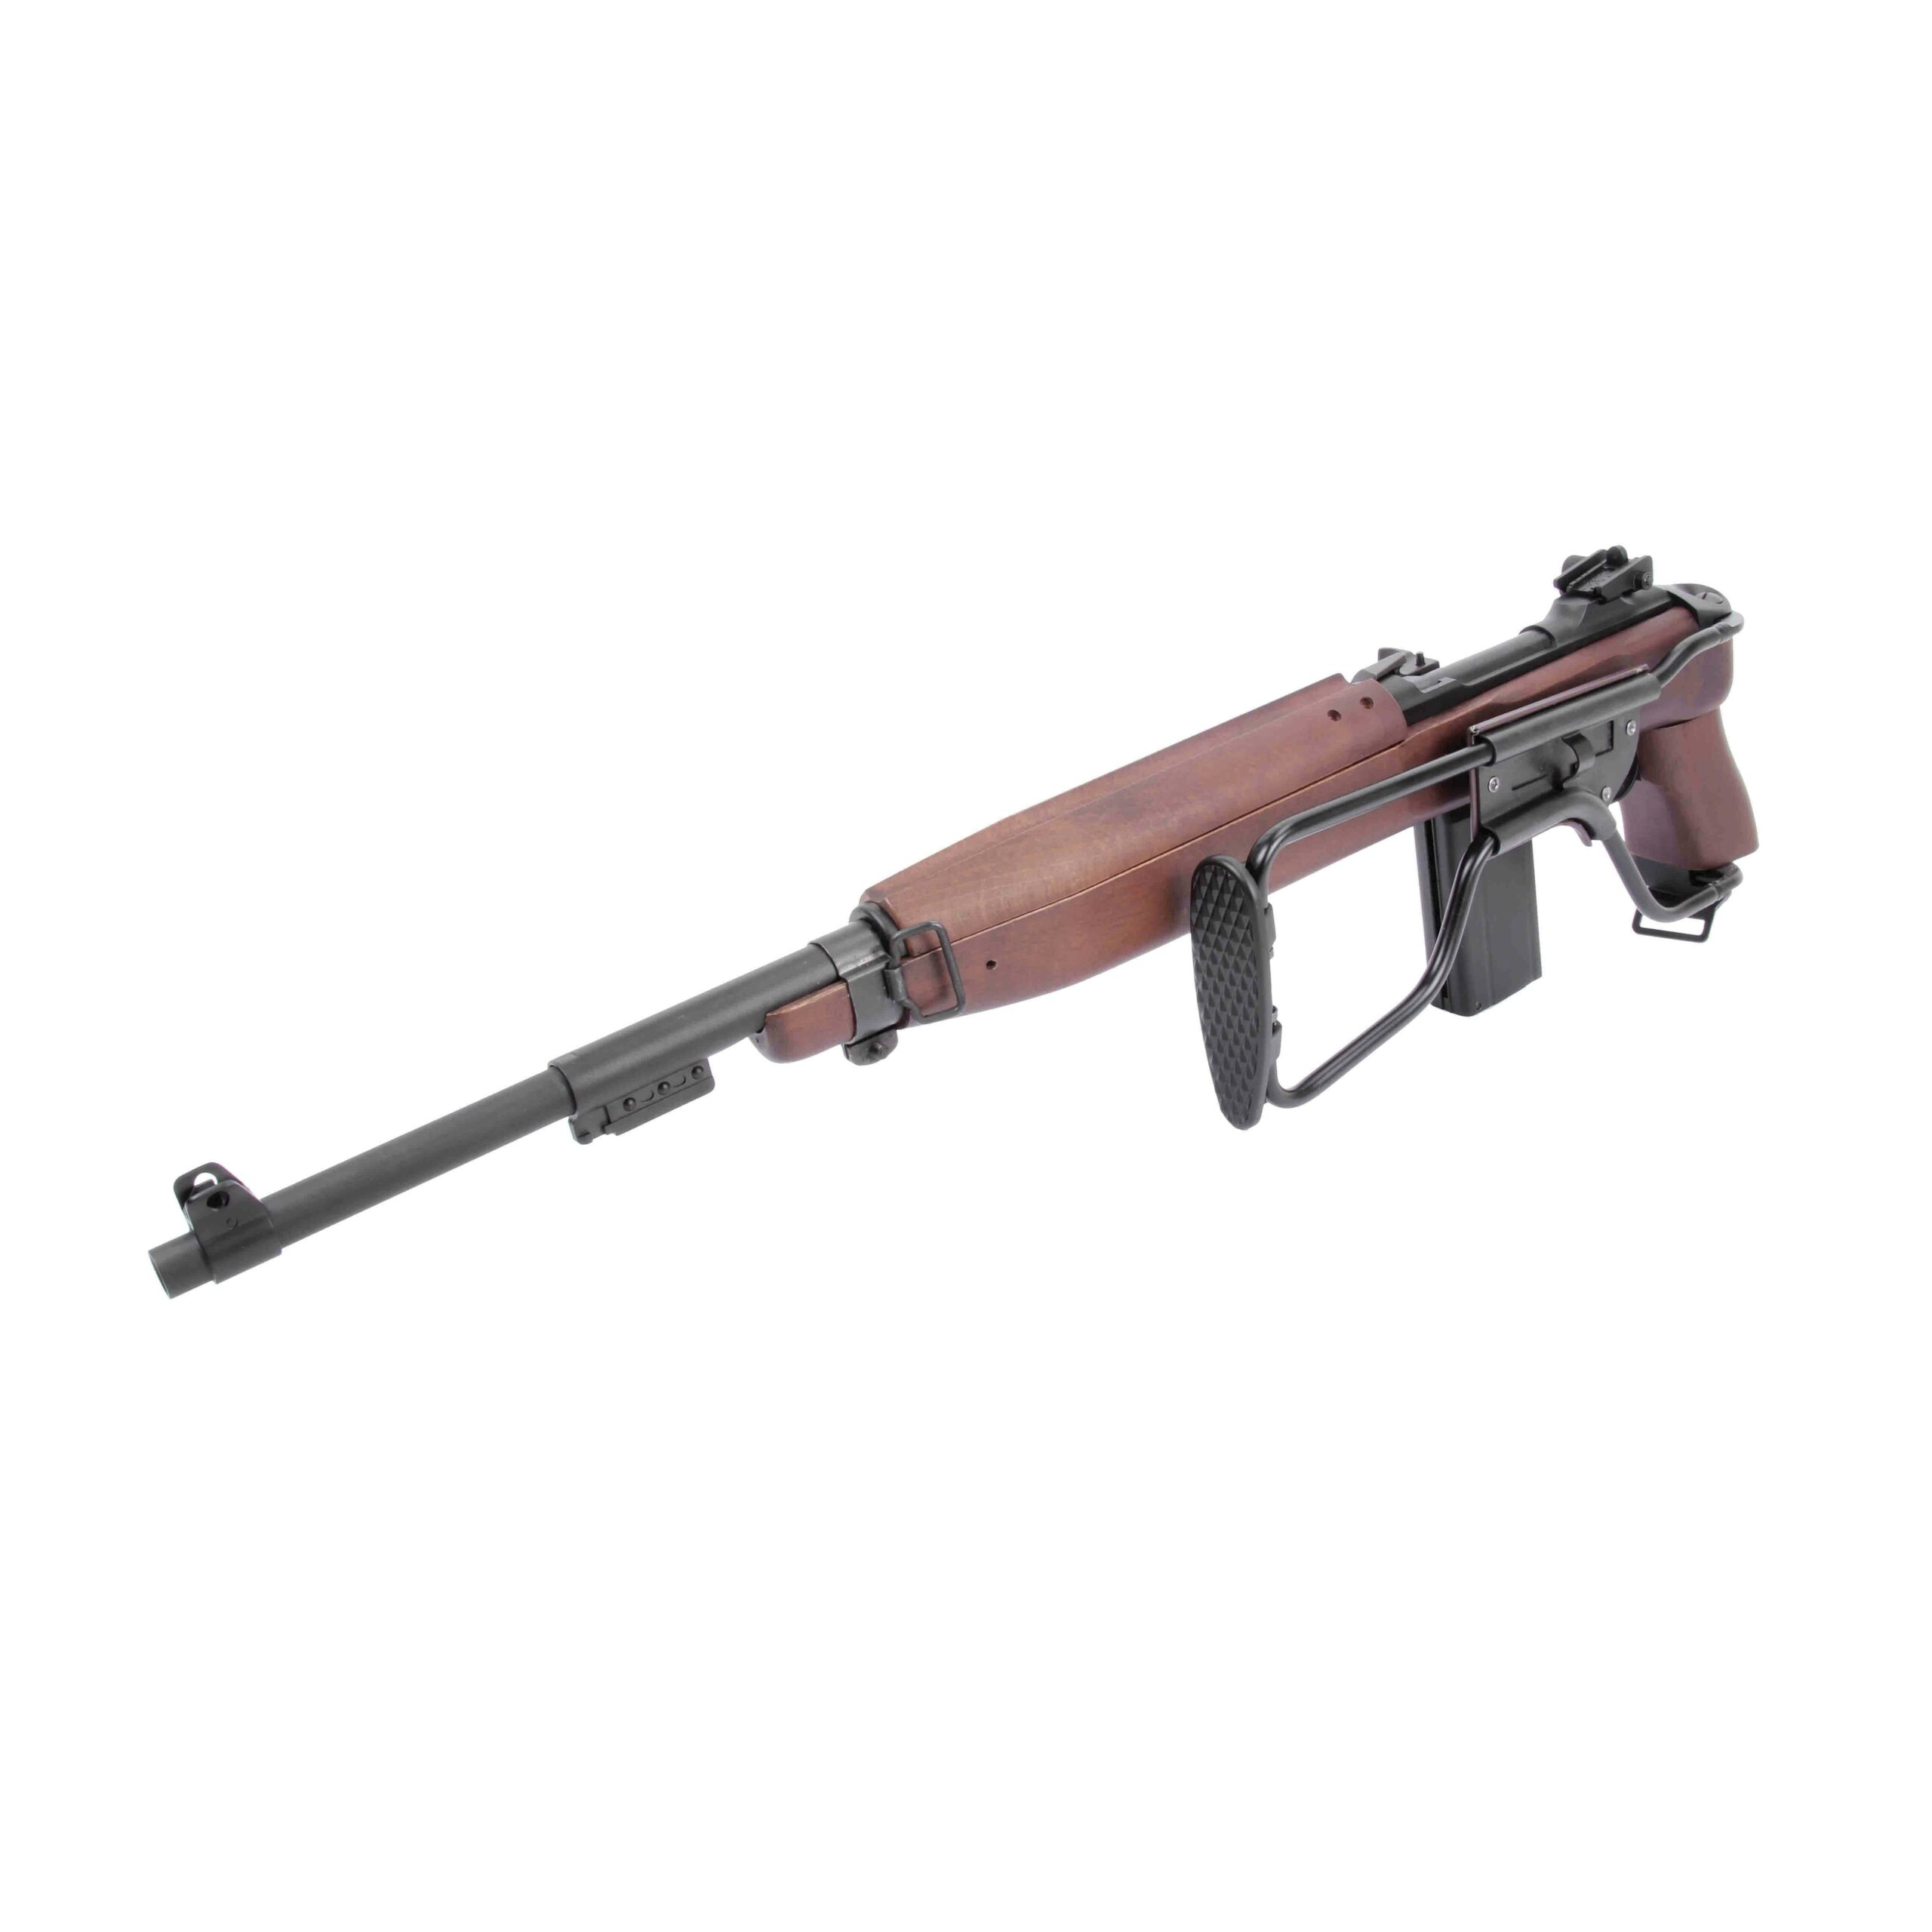 King Arms M1A1 Paratrooper (C02)